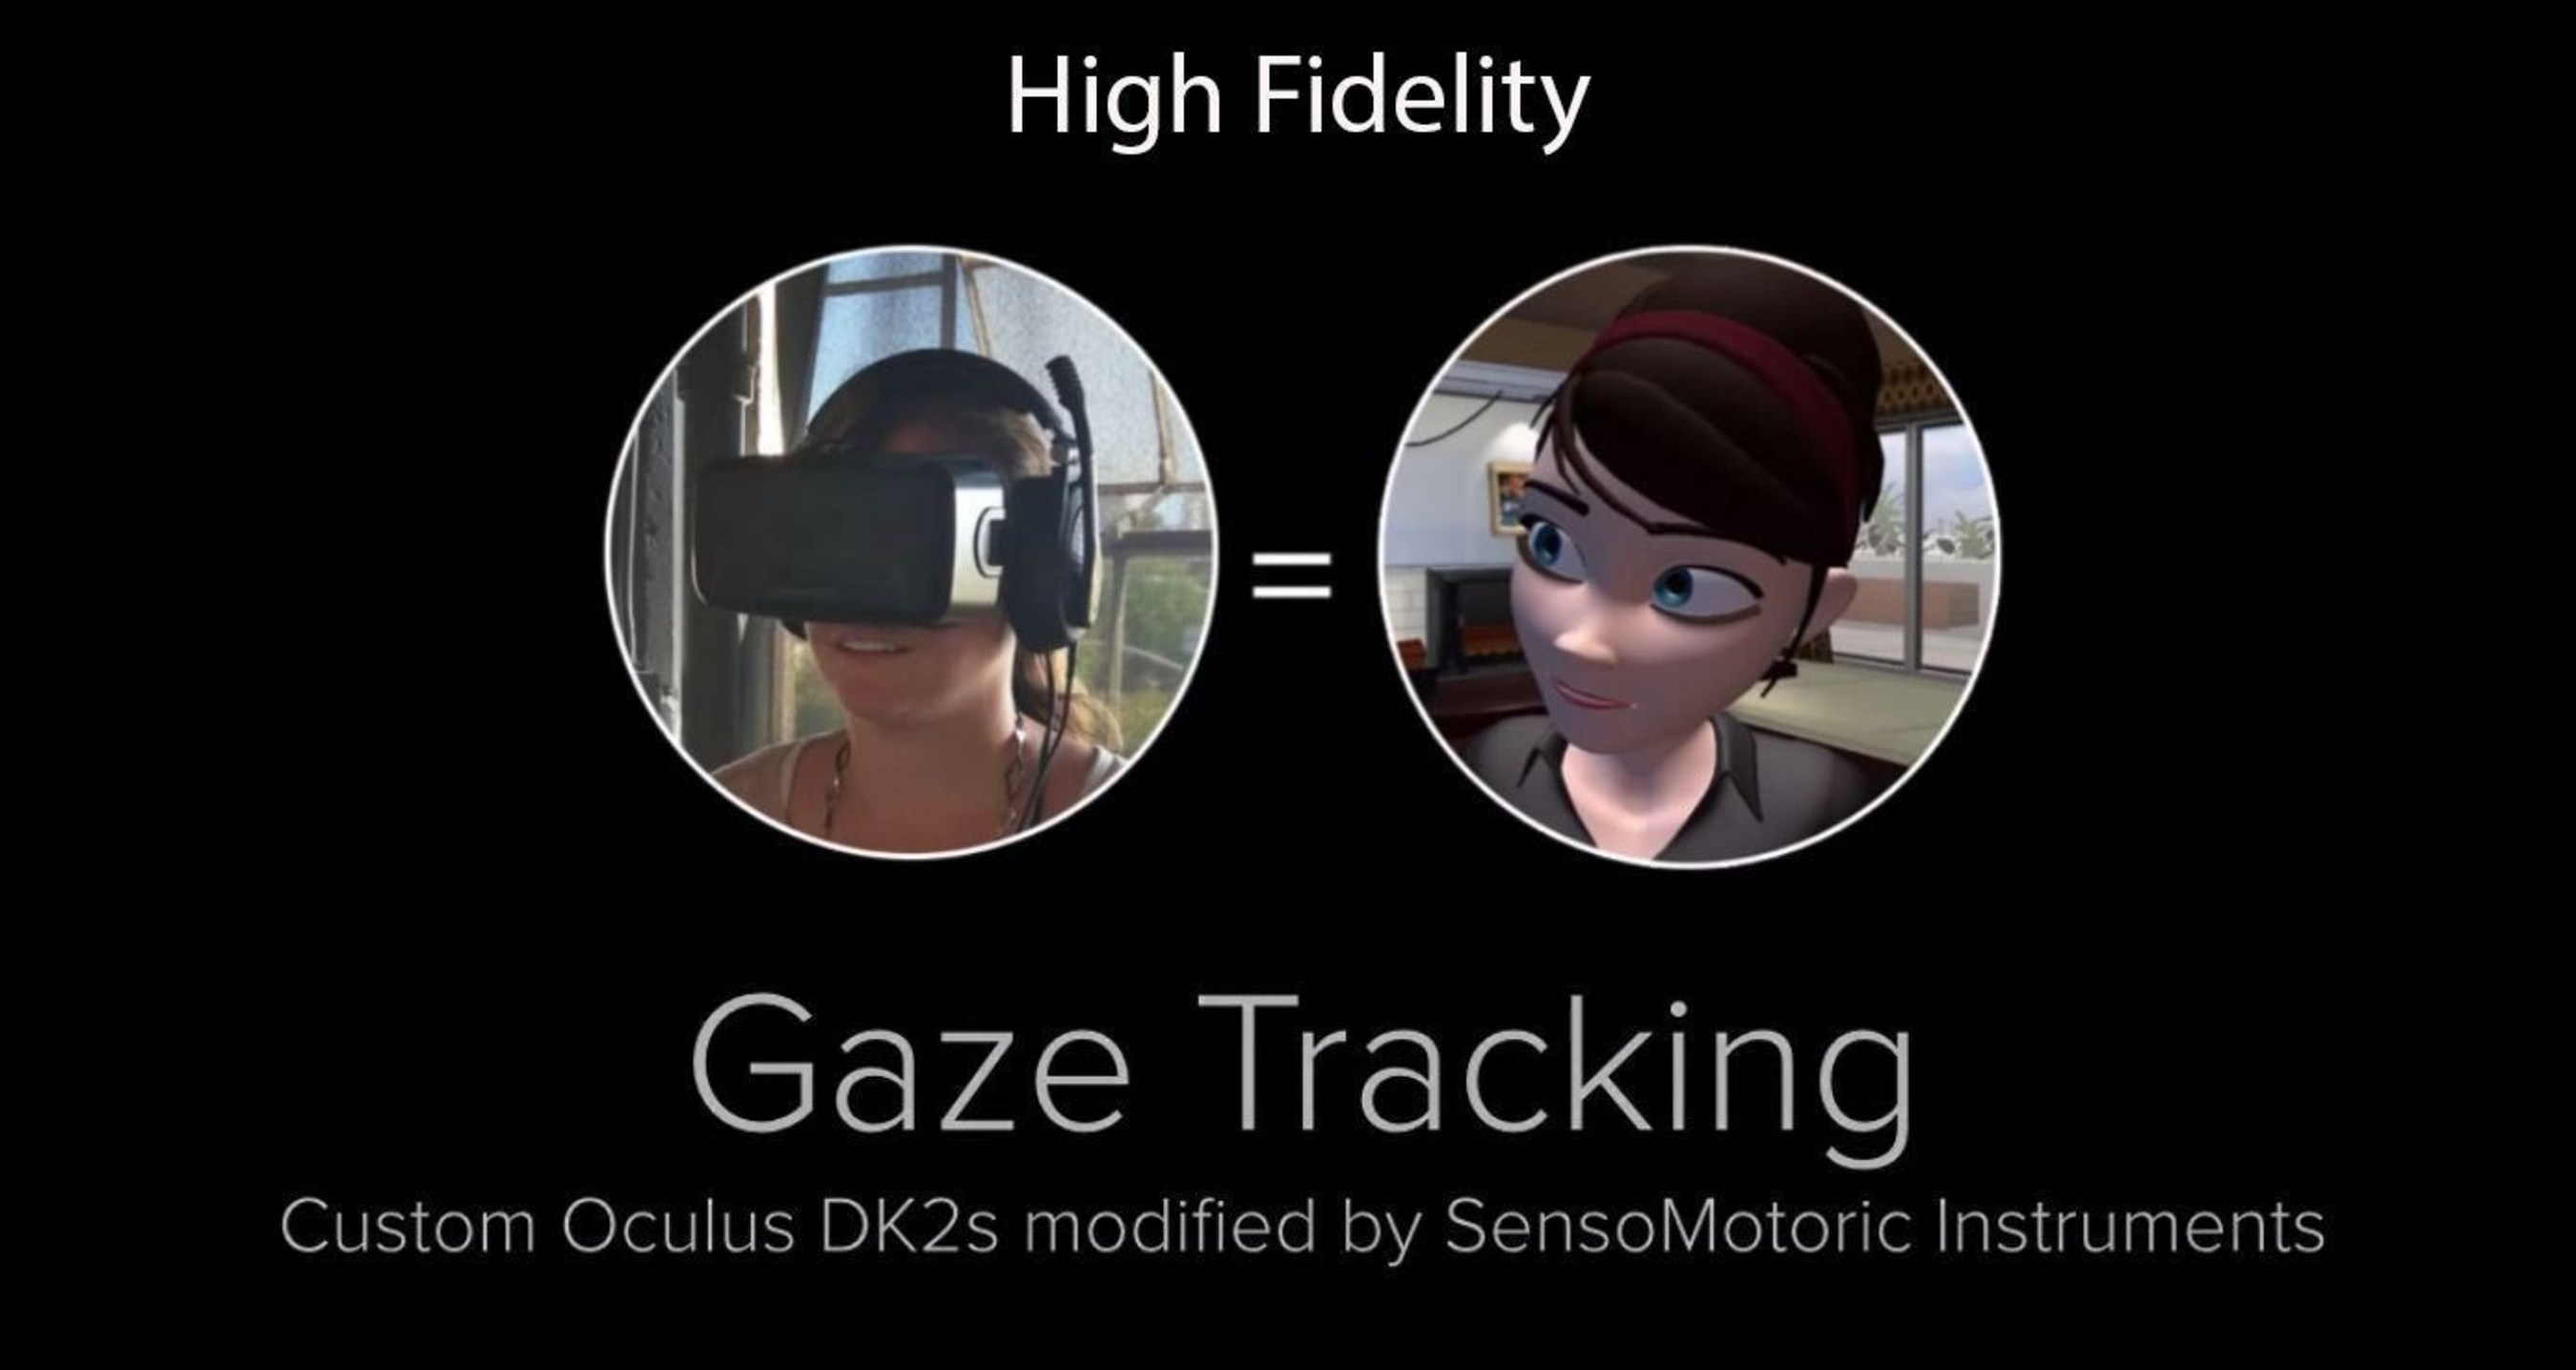 High Fidelity open source VR network adds real eye movements to avatar animations using eye tracking for Virtual Reality Headsets by SensoMotoric Instruments (SMI). (PRNewsFoto/SensoMotoric Instruments GmbH) (PRNewsFoto/SensoMotoric Instruments GmbH)